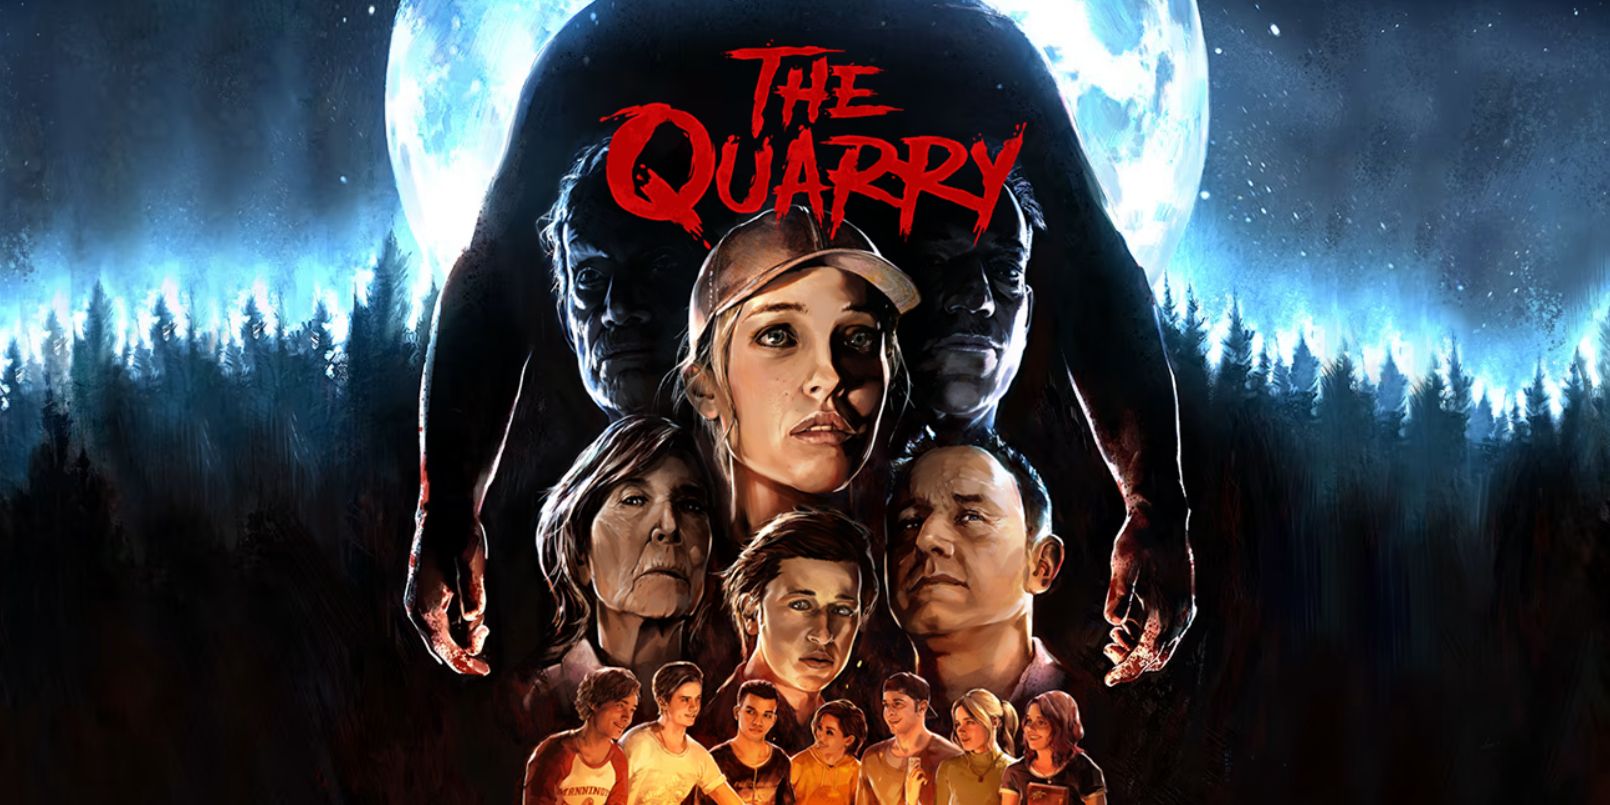 The cover of The Quarry, styled to look like a classic horror movie poster